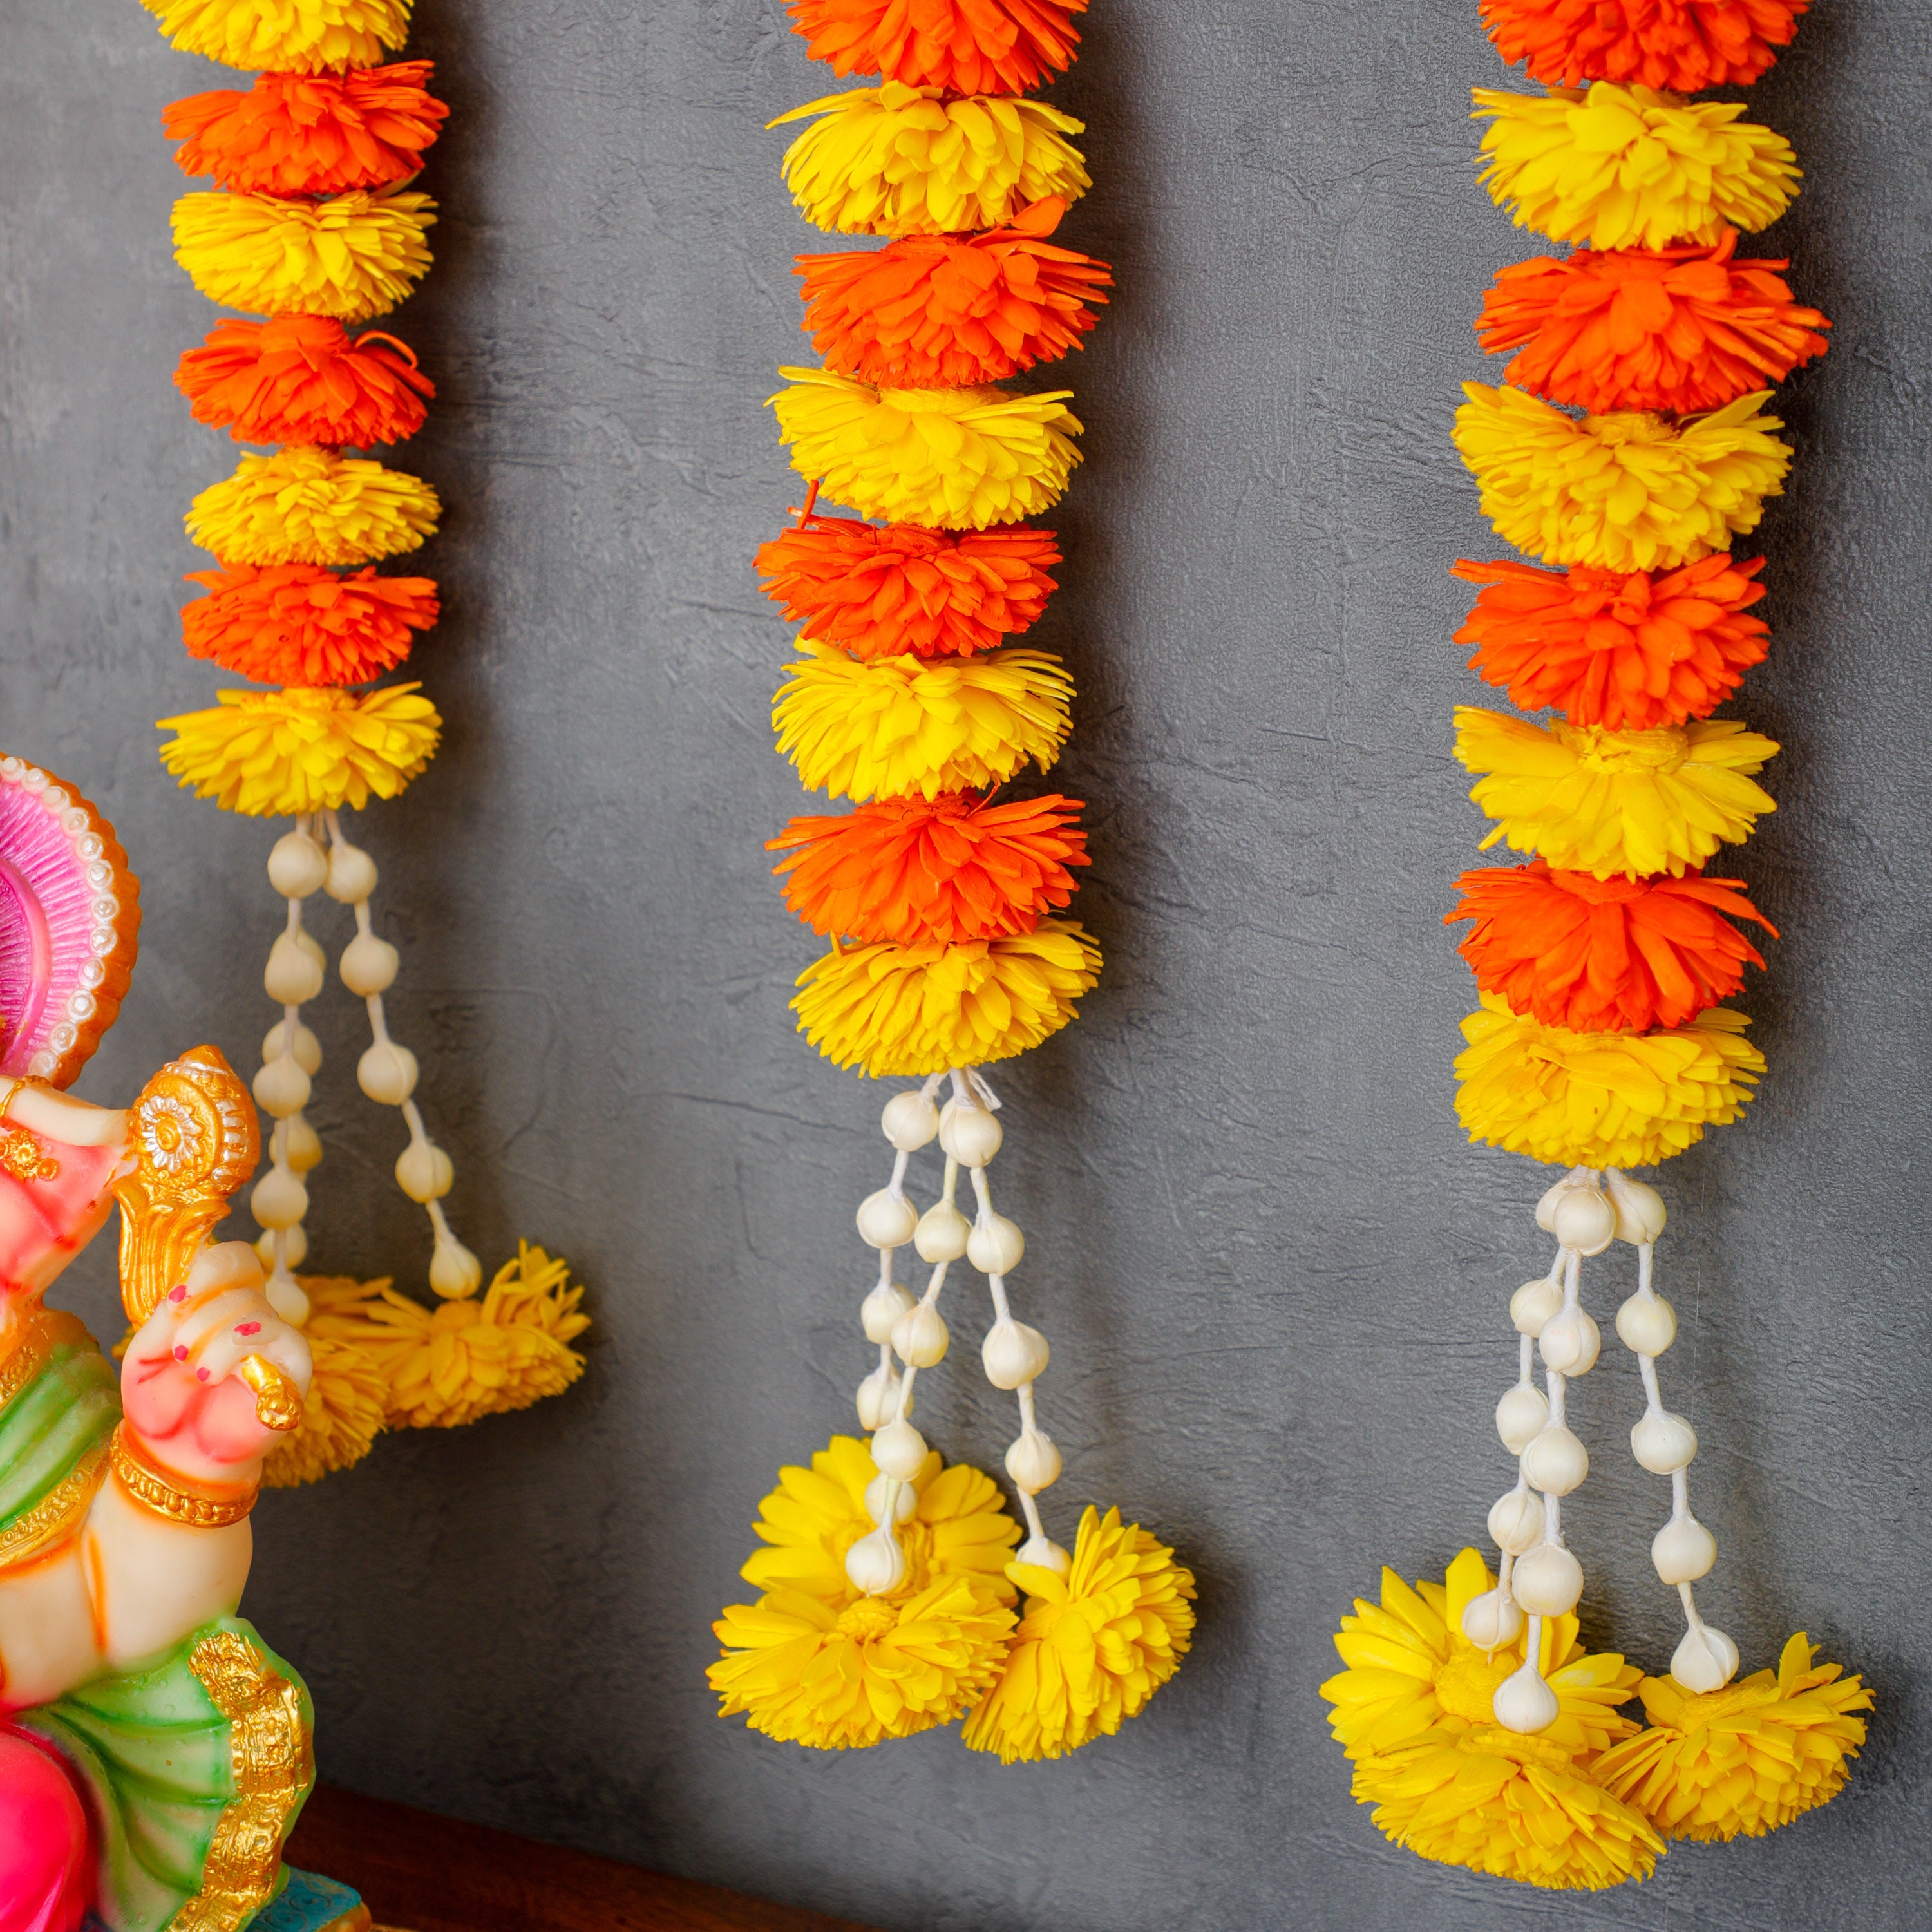 Our garlands can be used for decorating Hindu God pictures, adding an elegant touch to your pooja room